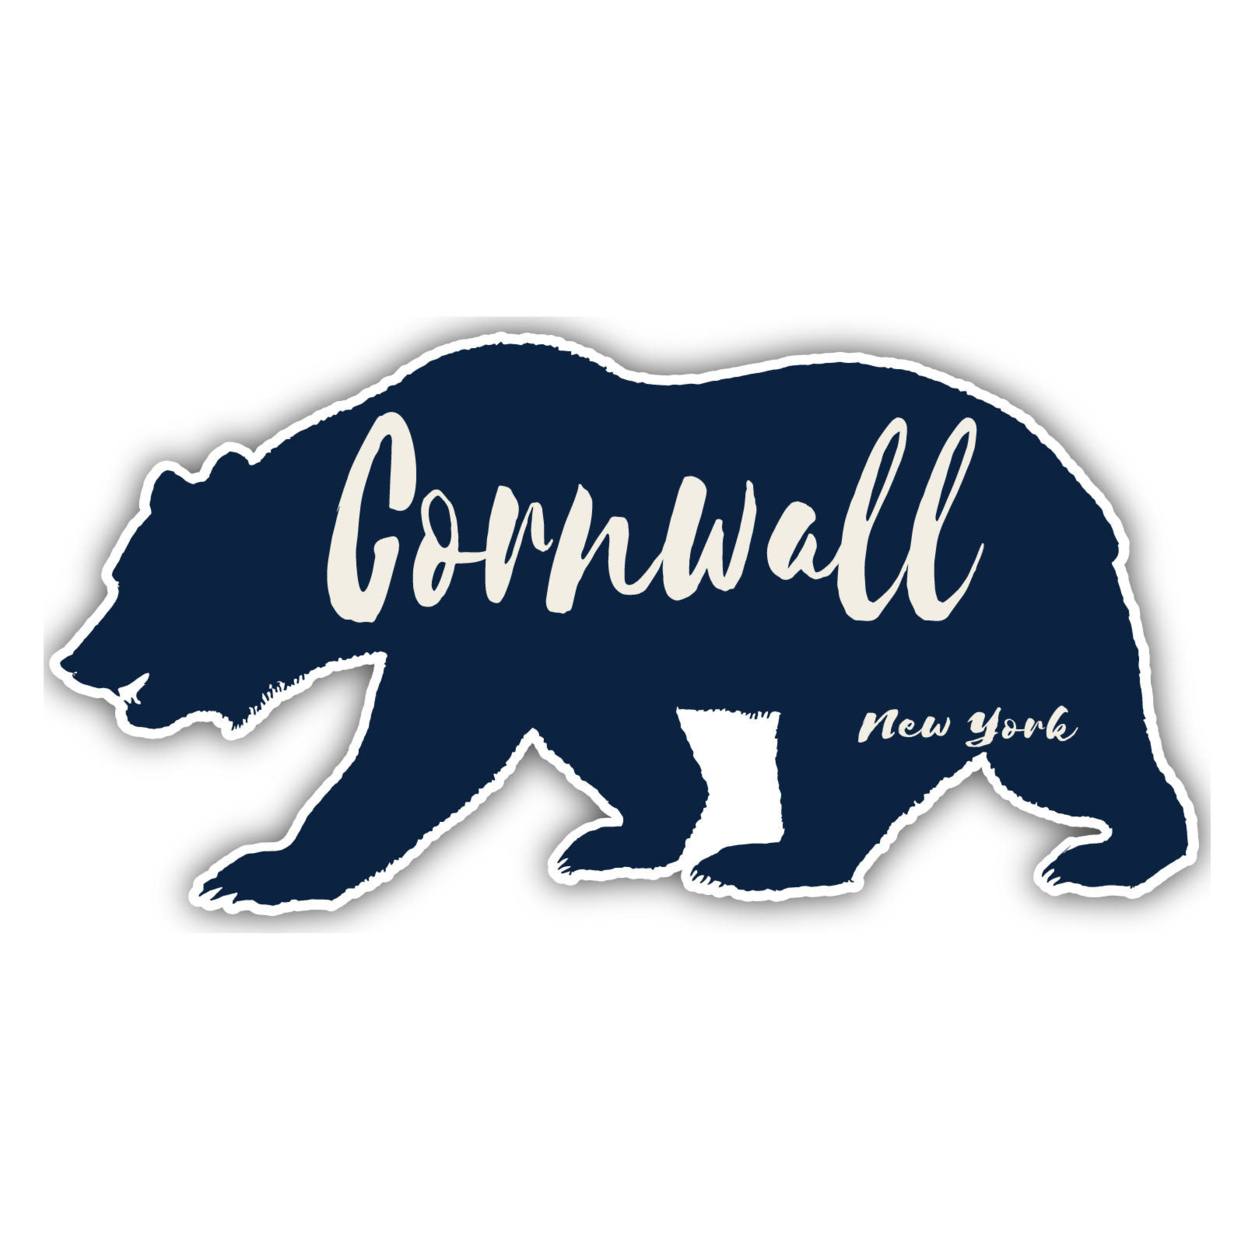 Cornwall New York Souvenir Decorative Stickers (Choose Theme And Size) - 4-Pack, 8-Inch, Bear